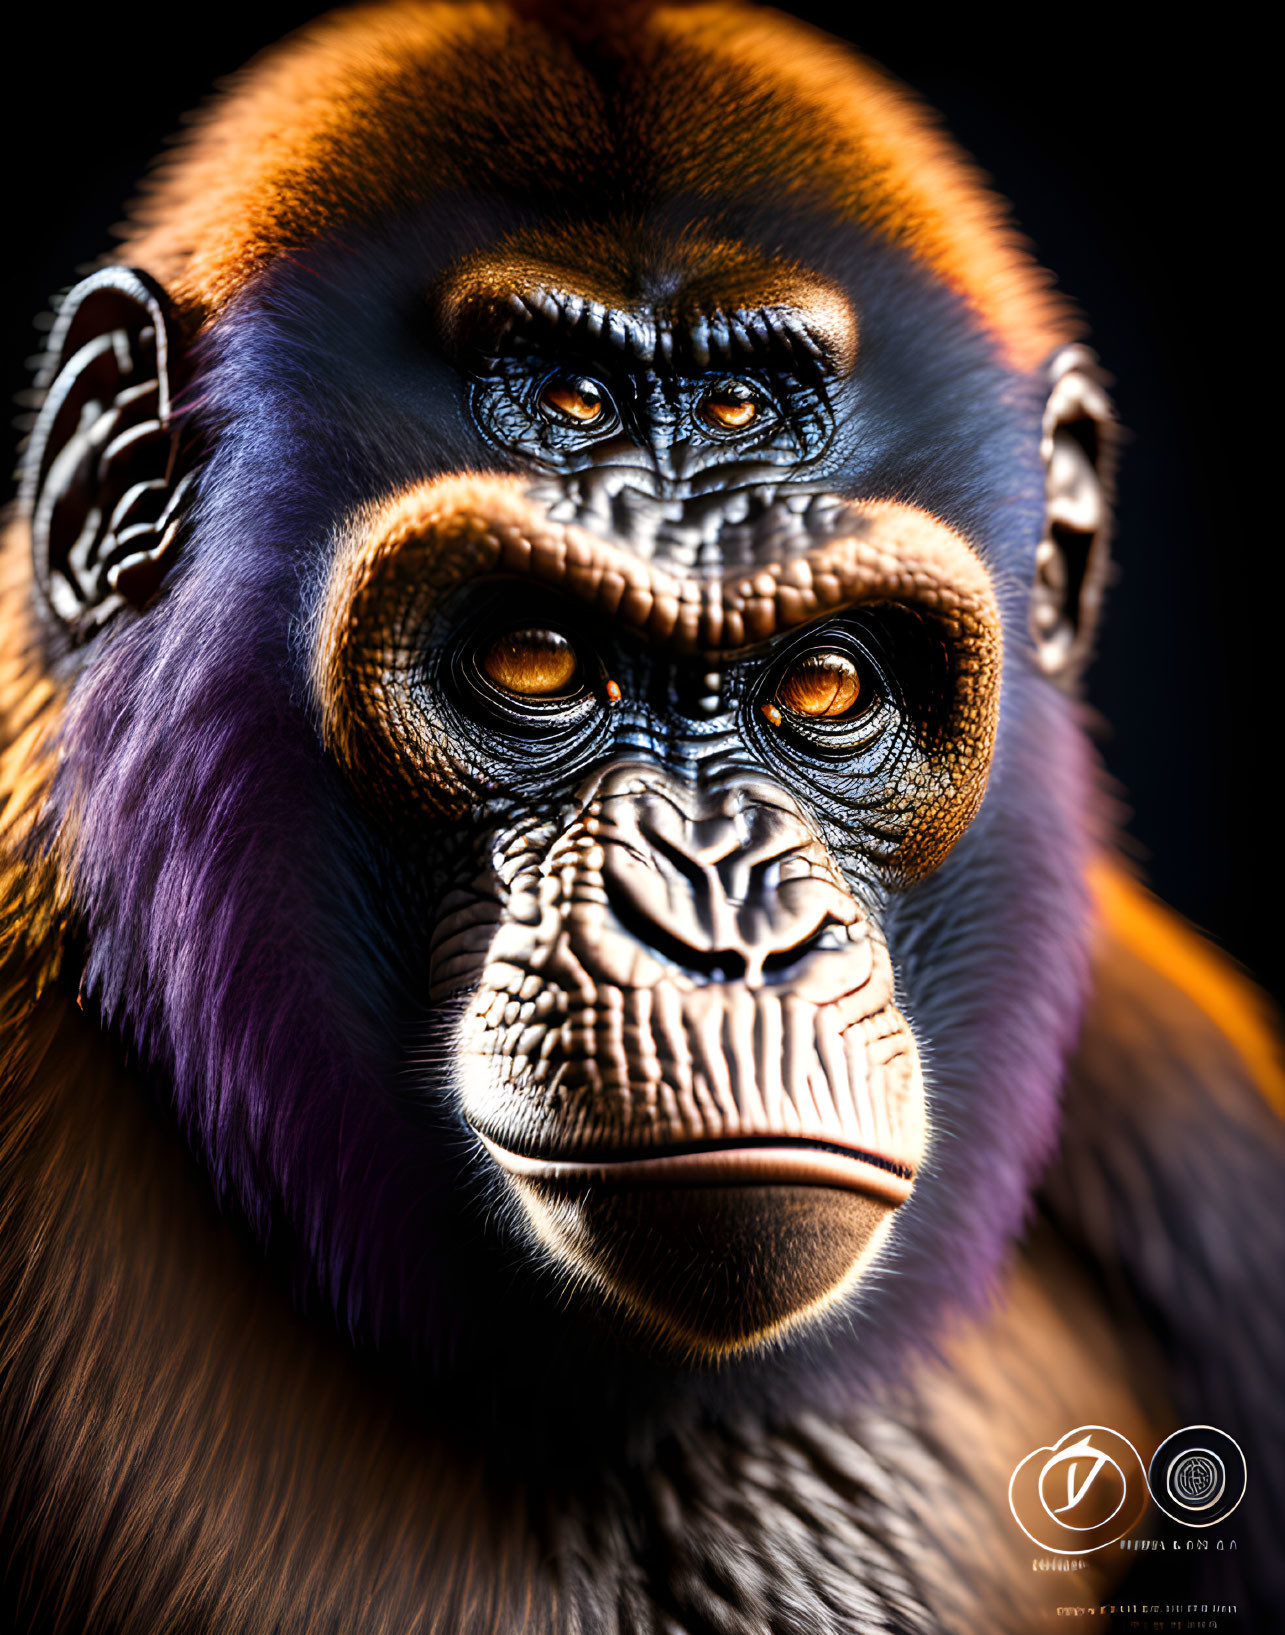 Detailed colorful digital gorilla portrait with intense eyes and intricate facial textures